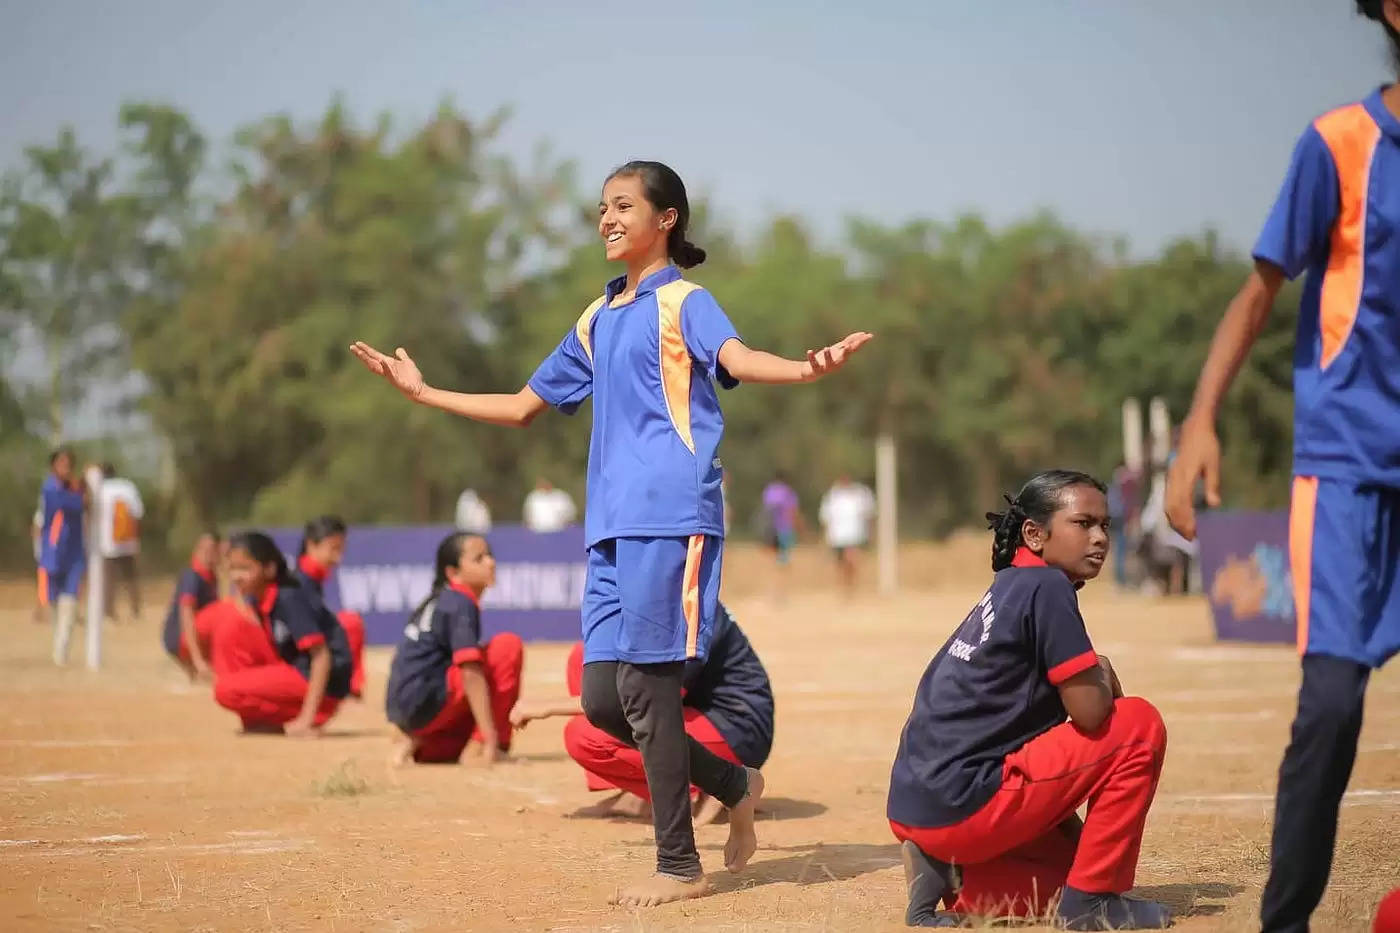 Kho Kho – Did You Know the Game Has Roots as Old as Mahabharata?